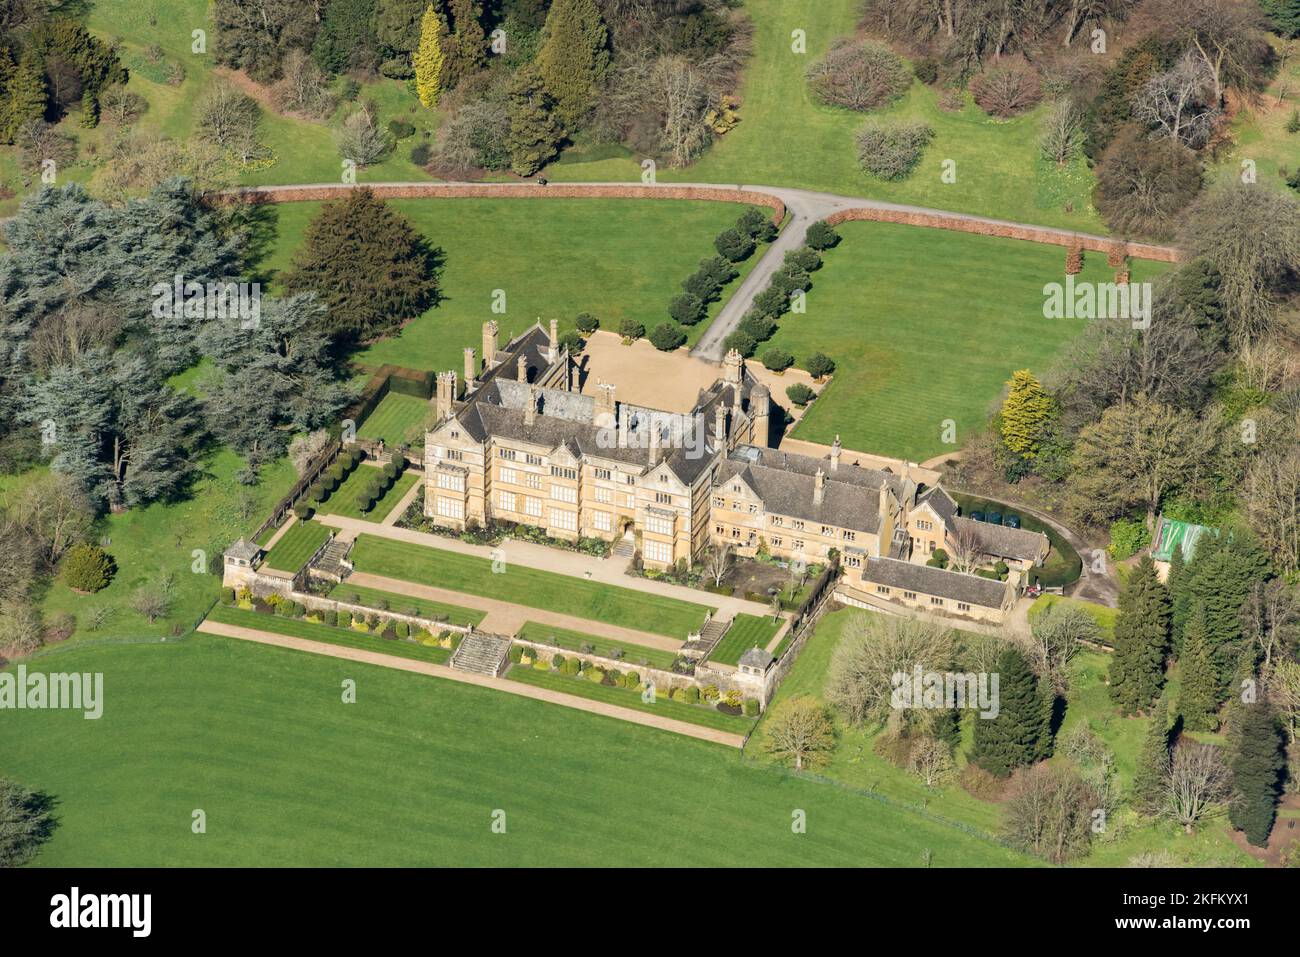 Batsford Park, an Elizabethan style country house, Batsford, Gloucestershire, 2018. Stock Photo